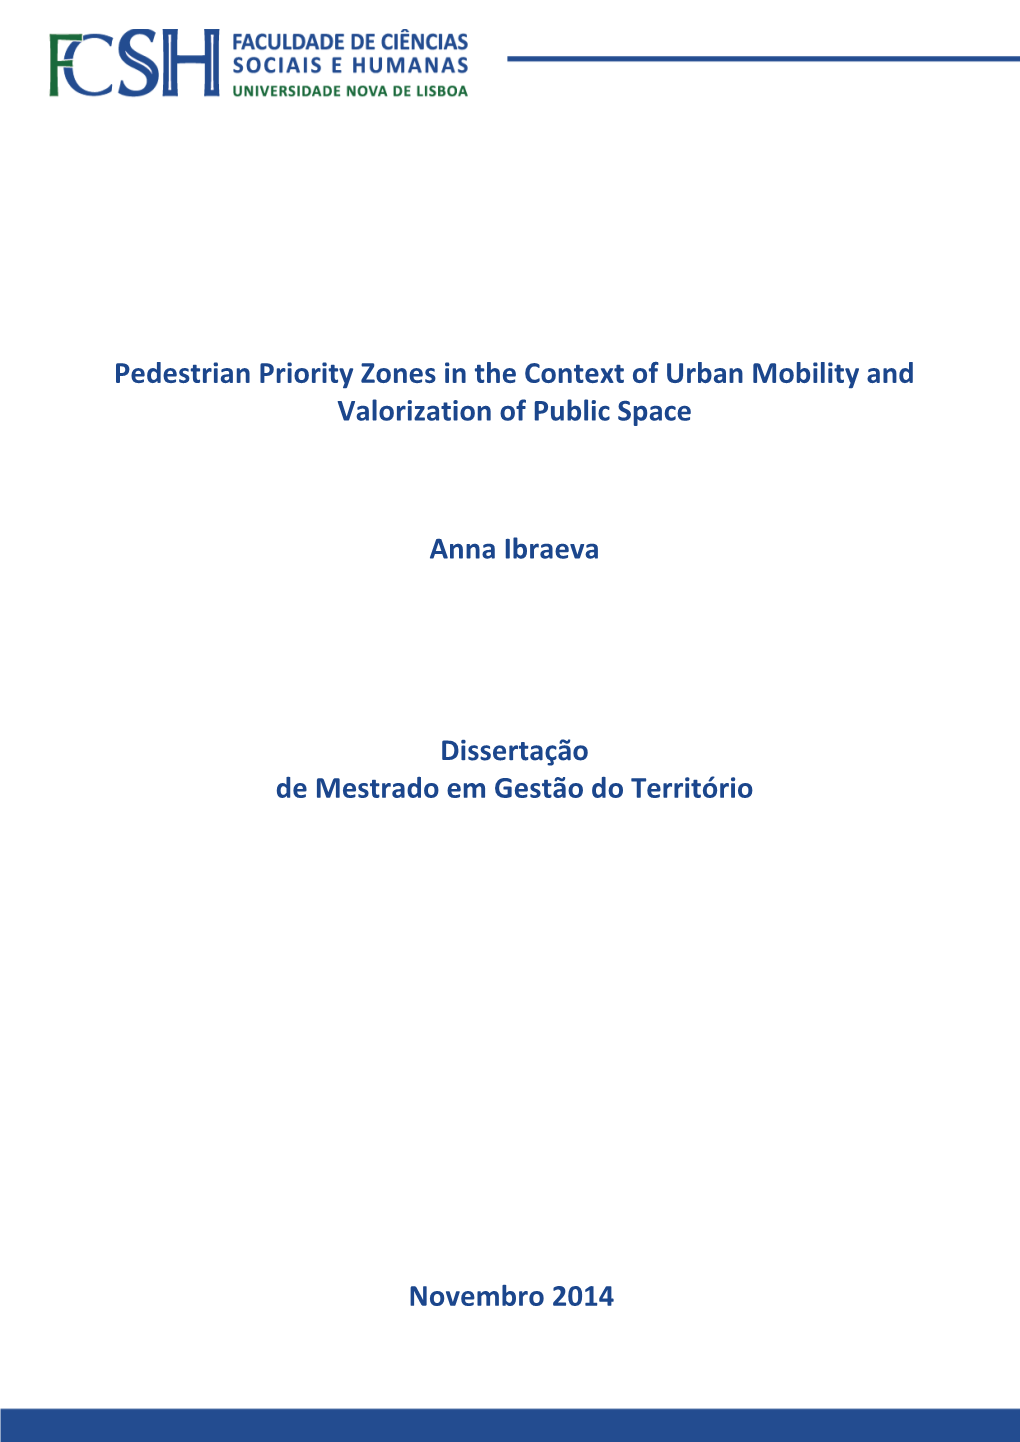 Pedestrian Priority Zones in the Context of Urban Mobility and Valorization of Public Space